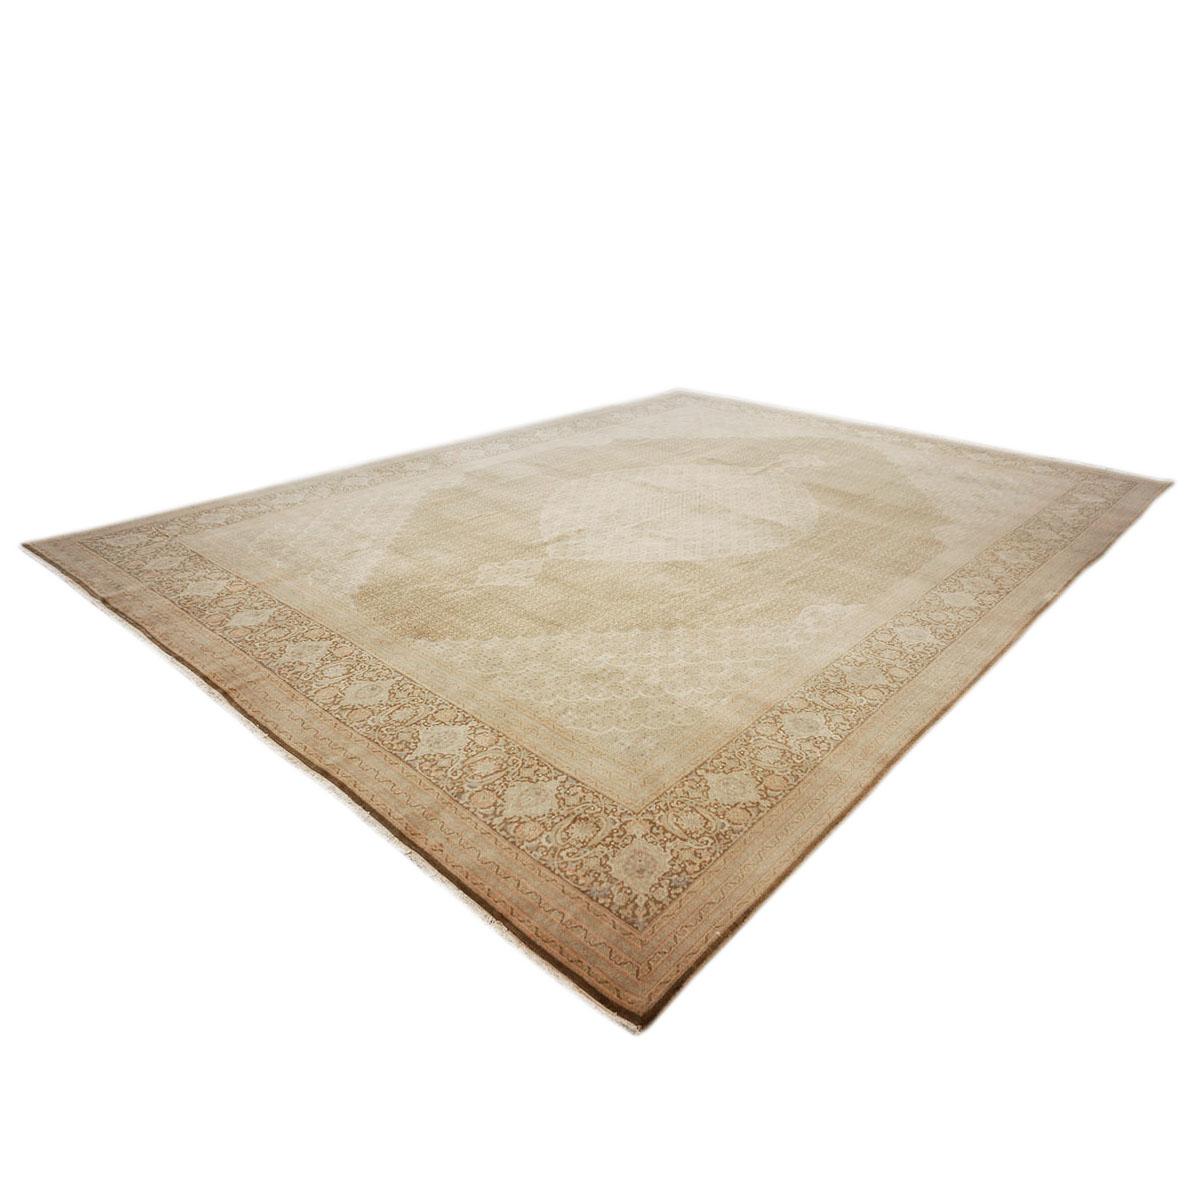 Mid-20th Century Antique 1940s Persian Tabriz 10x14 Ivory, Brown, & Tan Handmade Area Rug For Sale